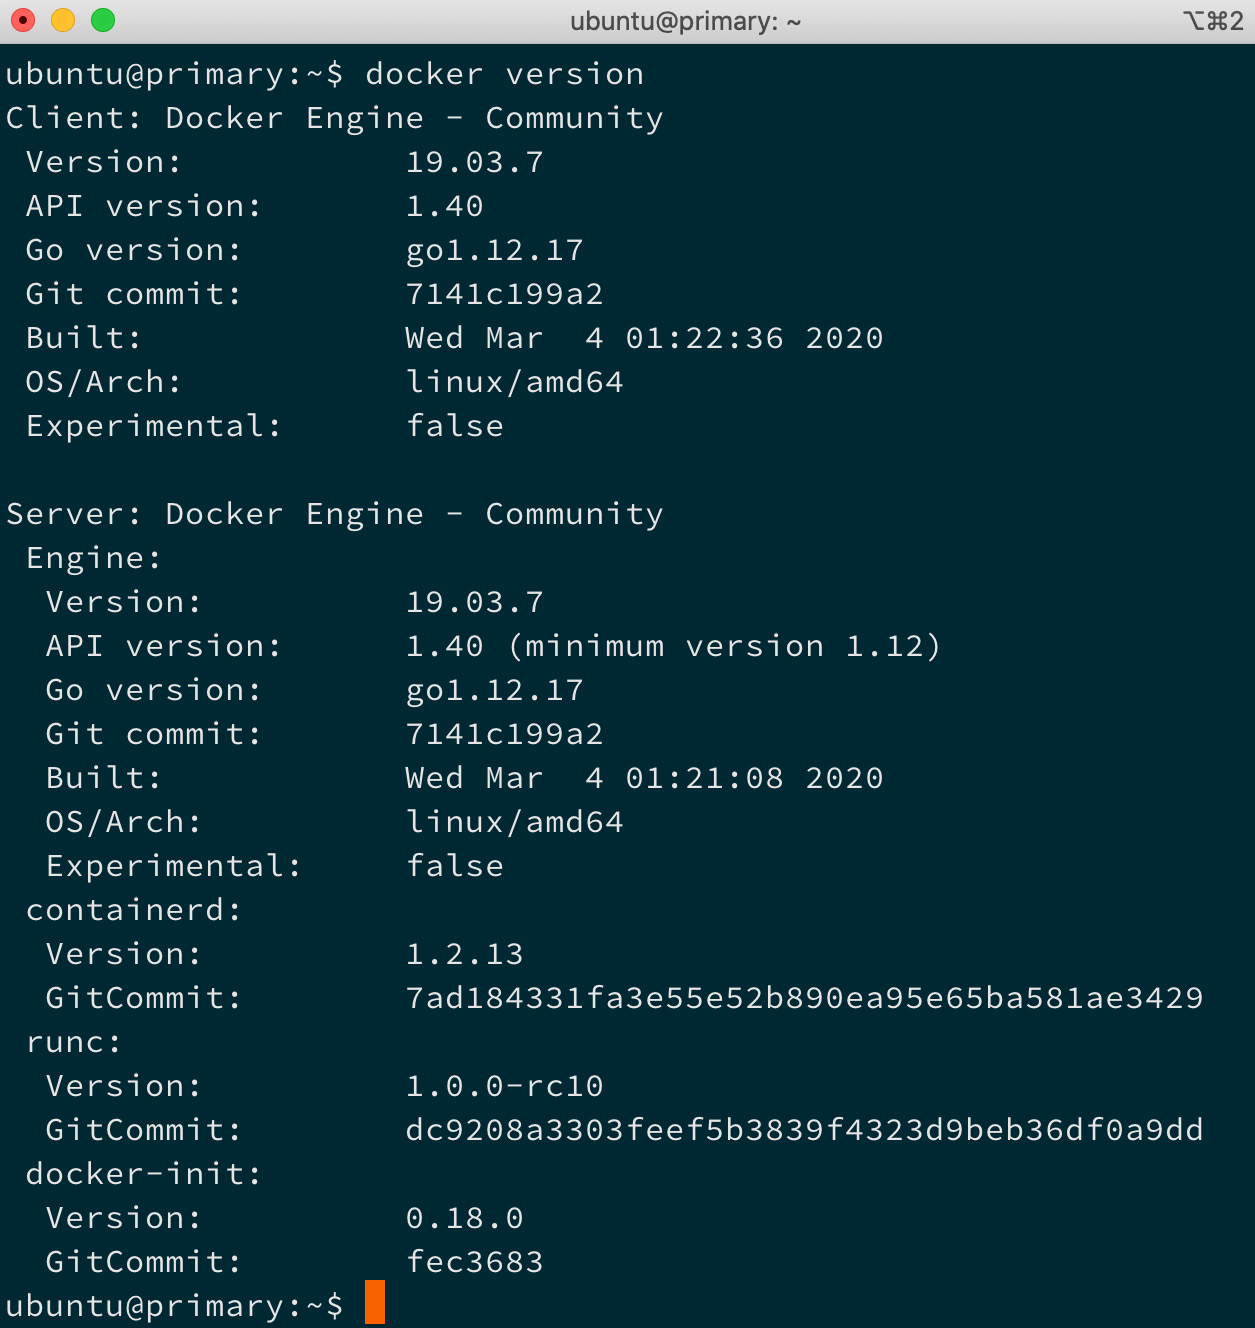 Figure 1.3 – Output of the docker version command showing the version of Docker installed on the system